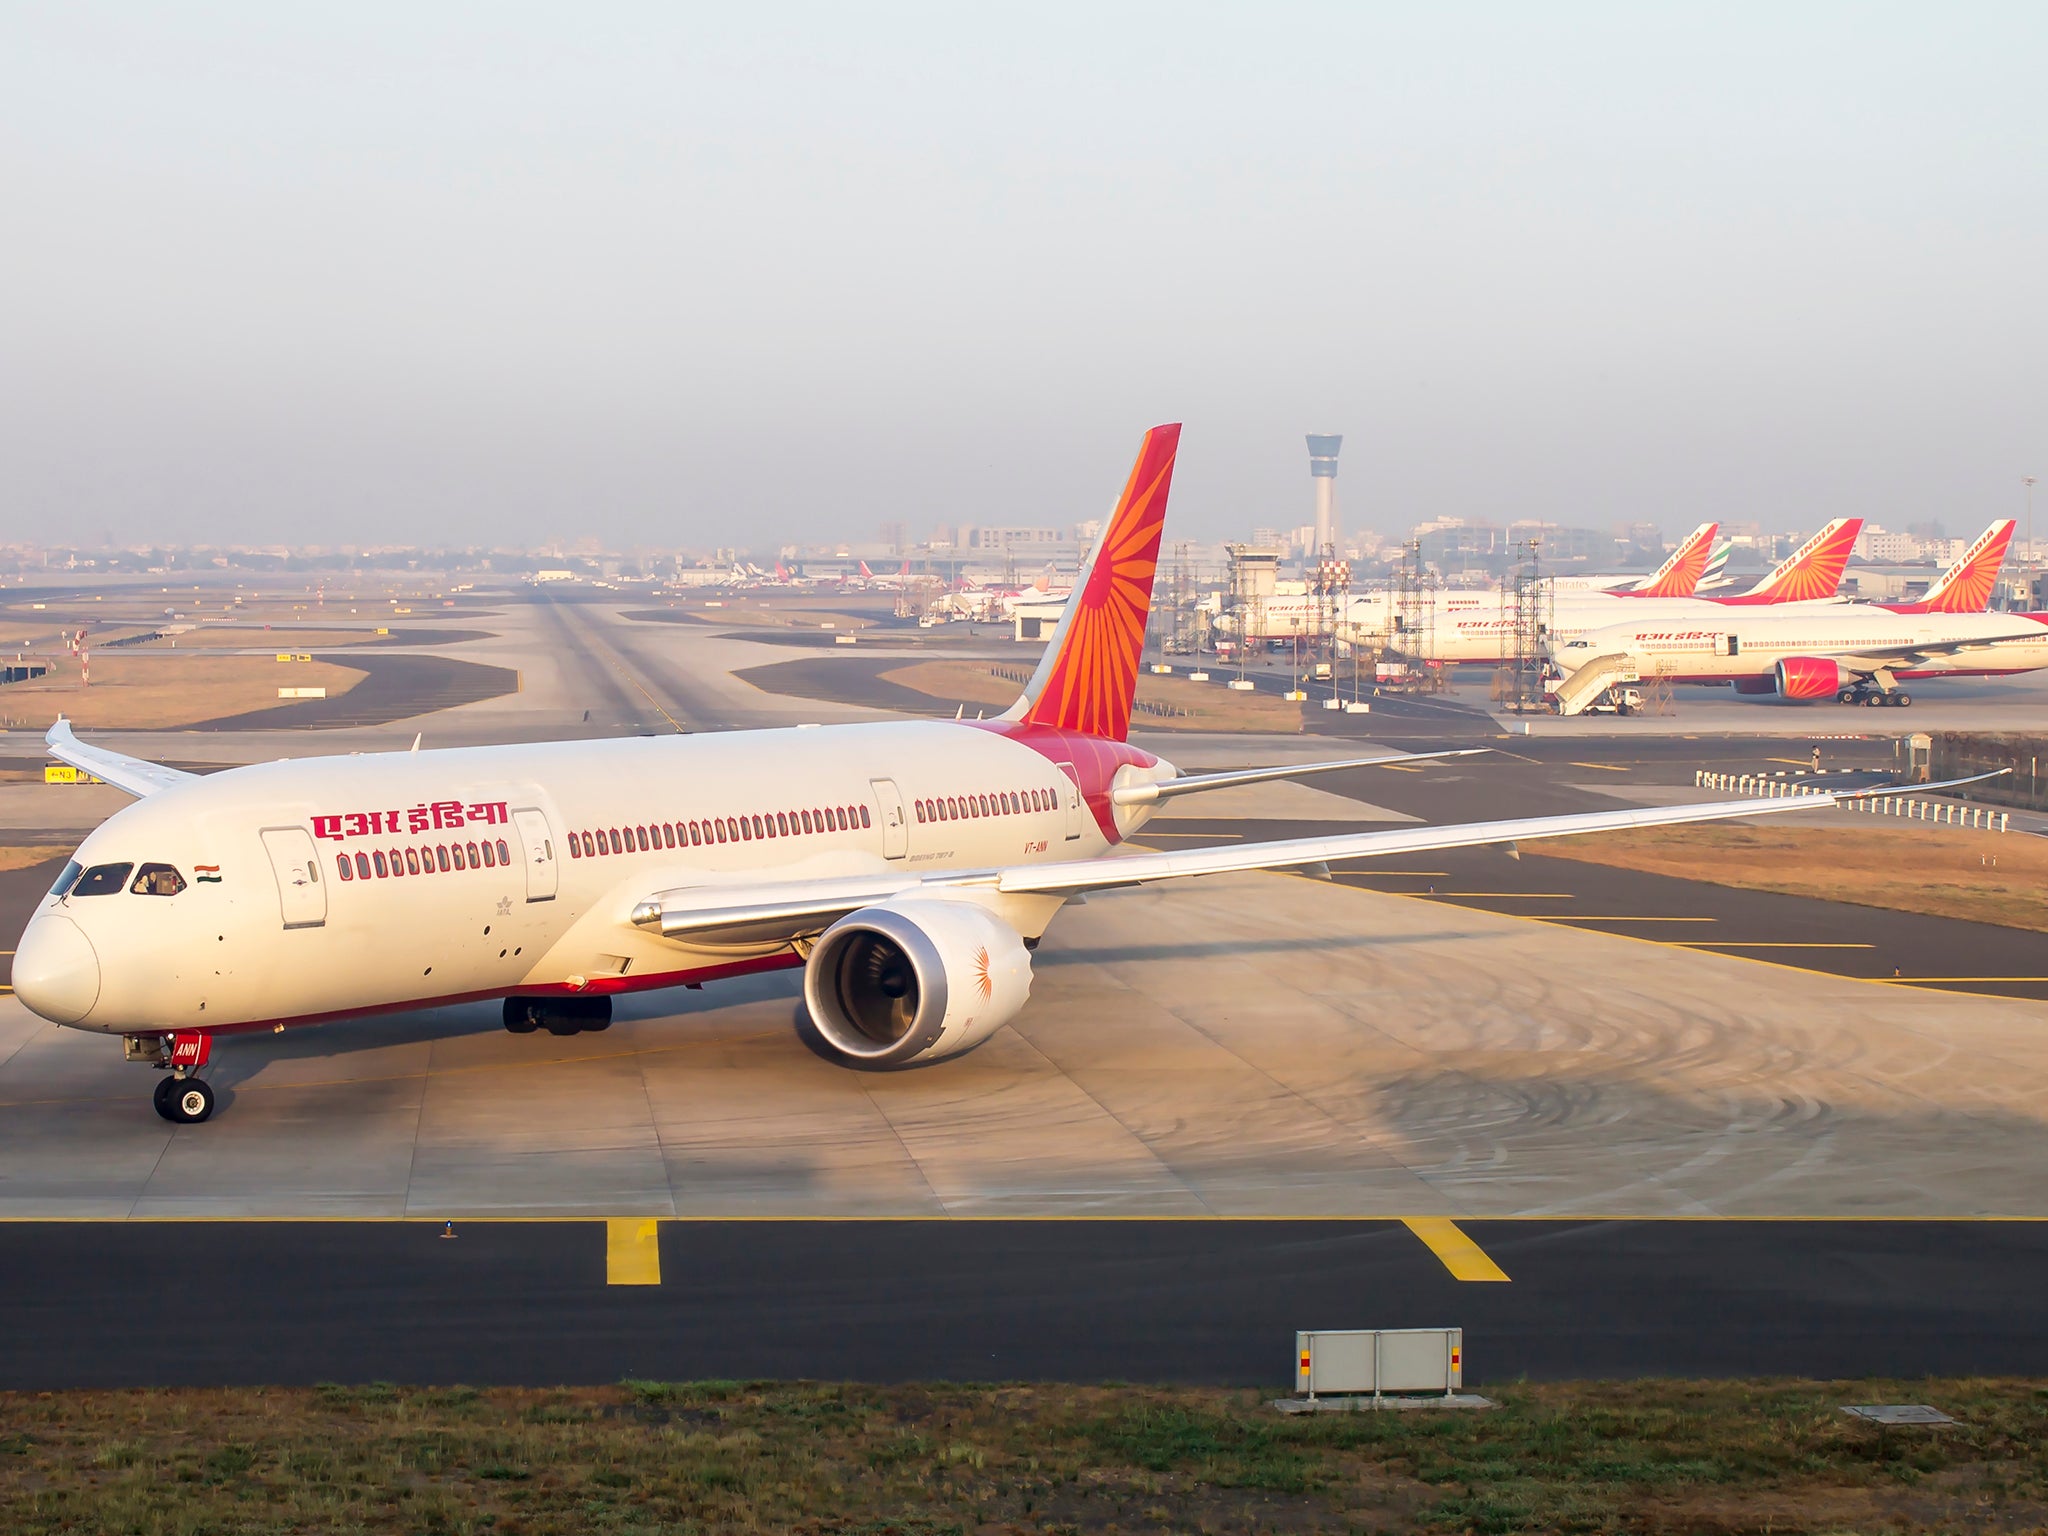 A swarm of bees delayed an Air India flight